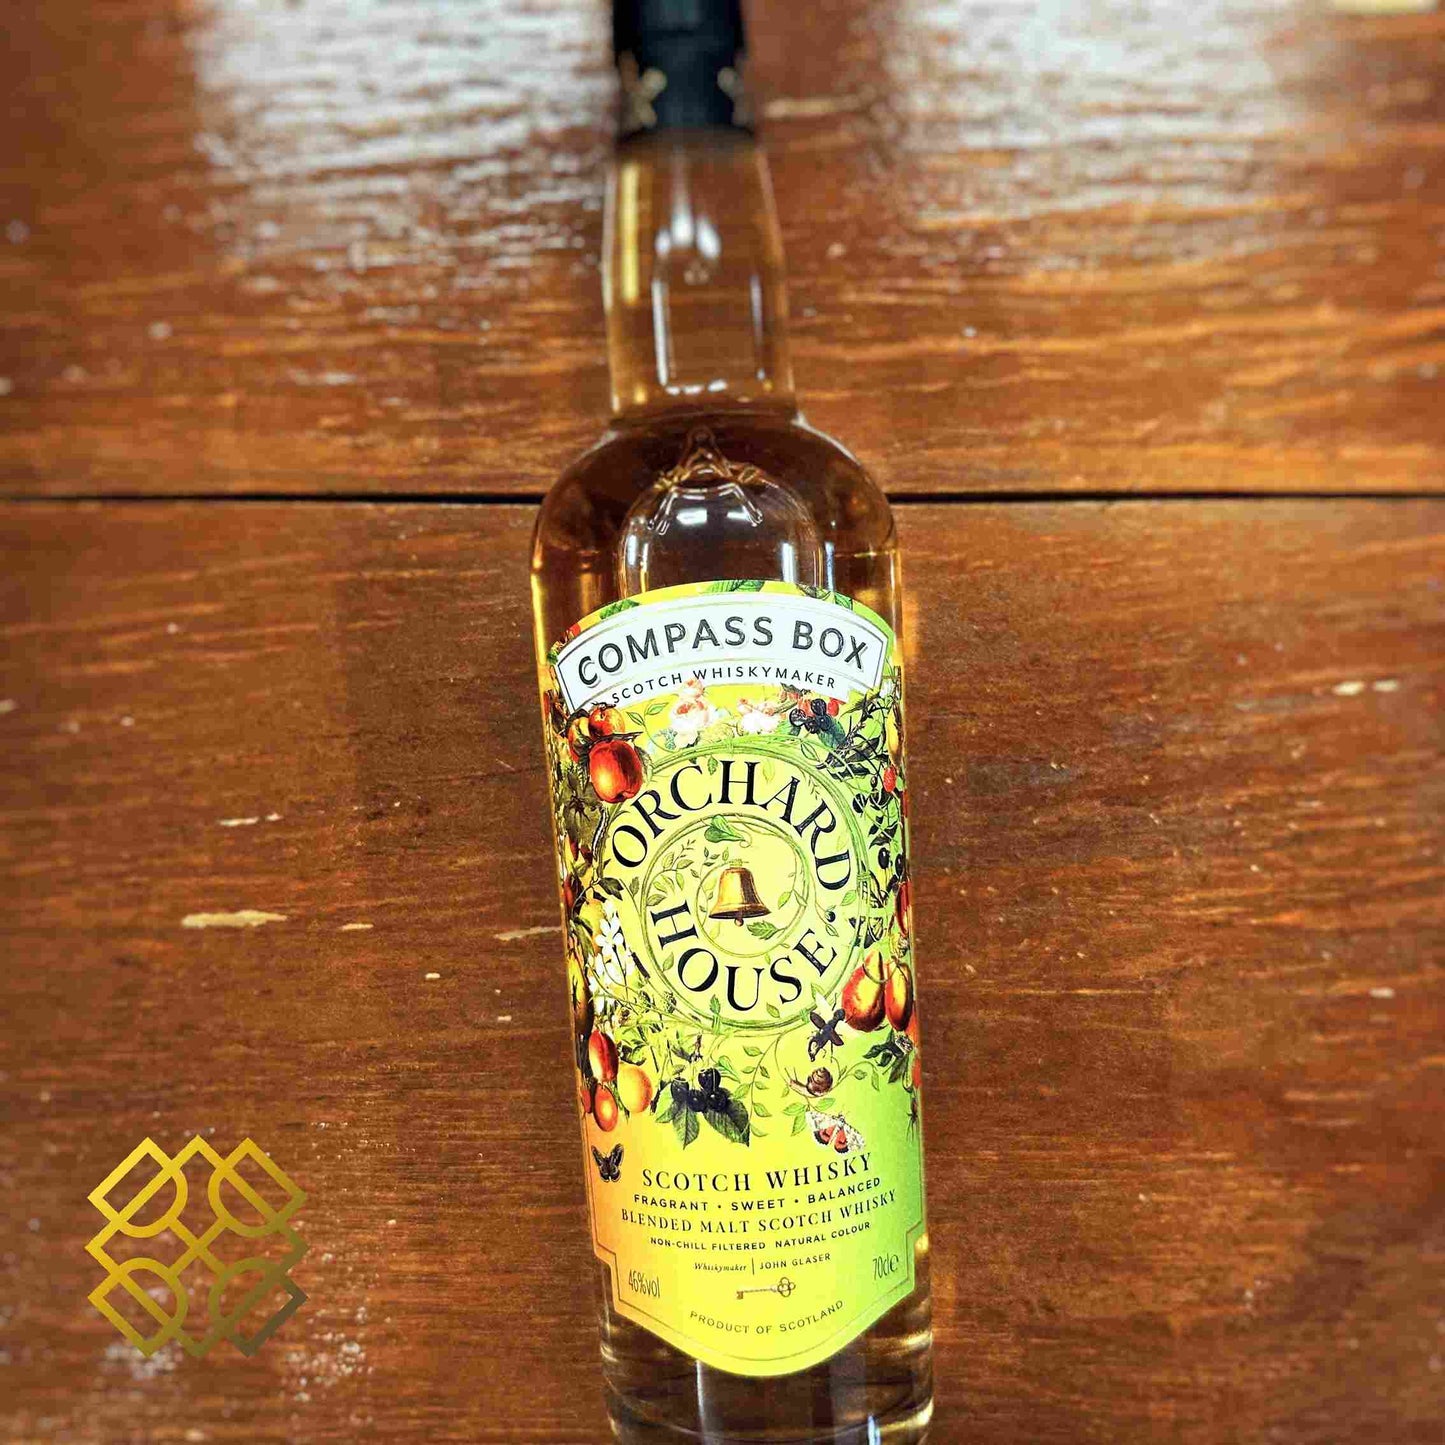 Compass Box - Orchard house 46% -  Compass Box Whisky